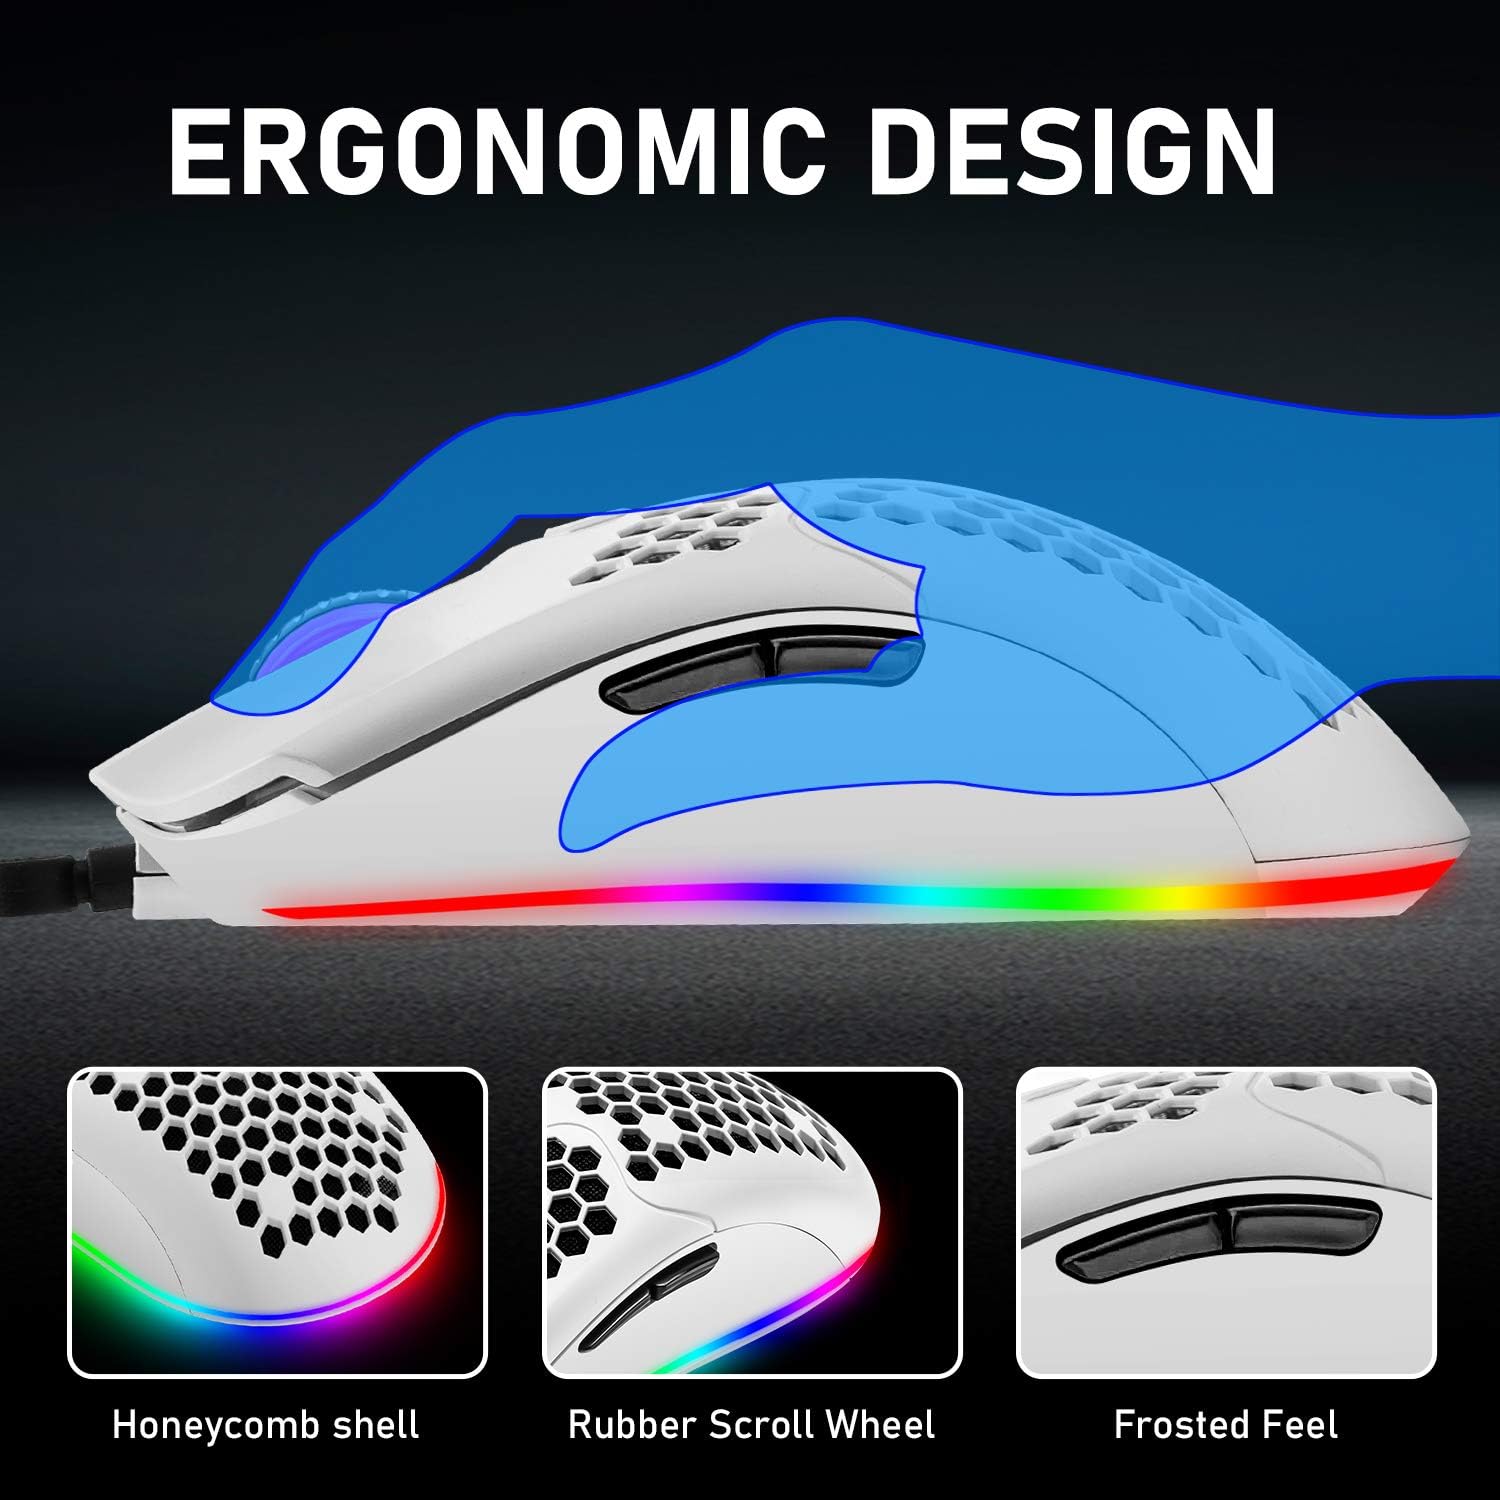 Wired Lightweight Gaming Mouse 69g Ultralight Honeycomb Shell RGB Chroma Backlit